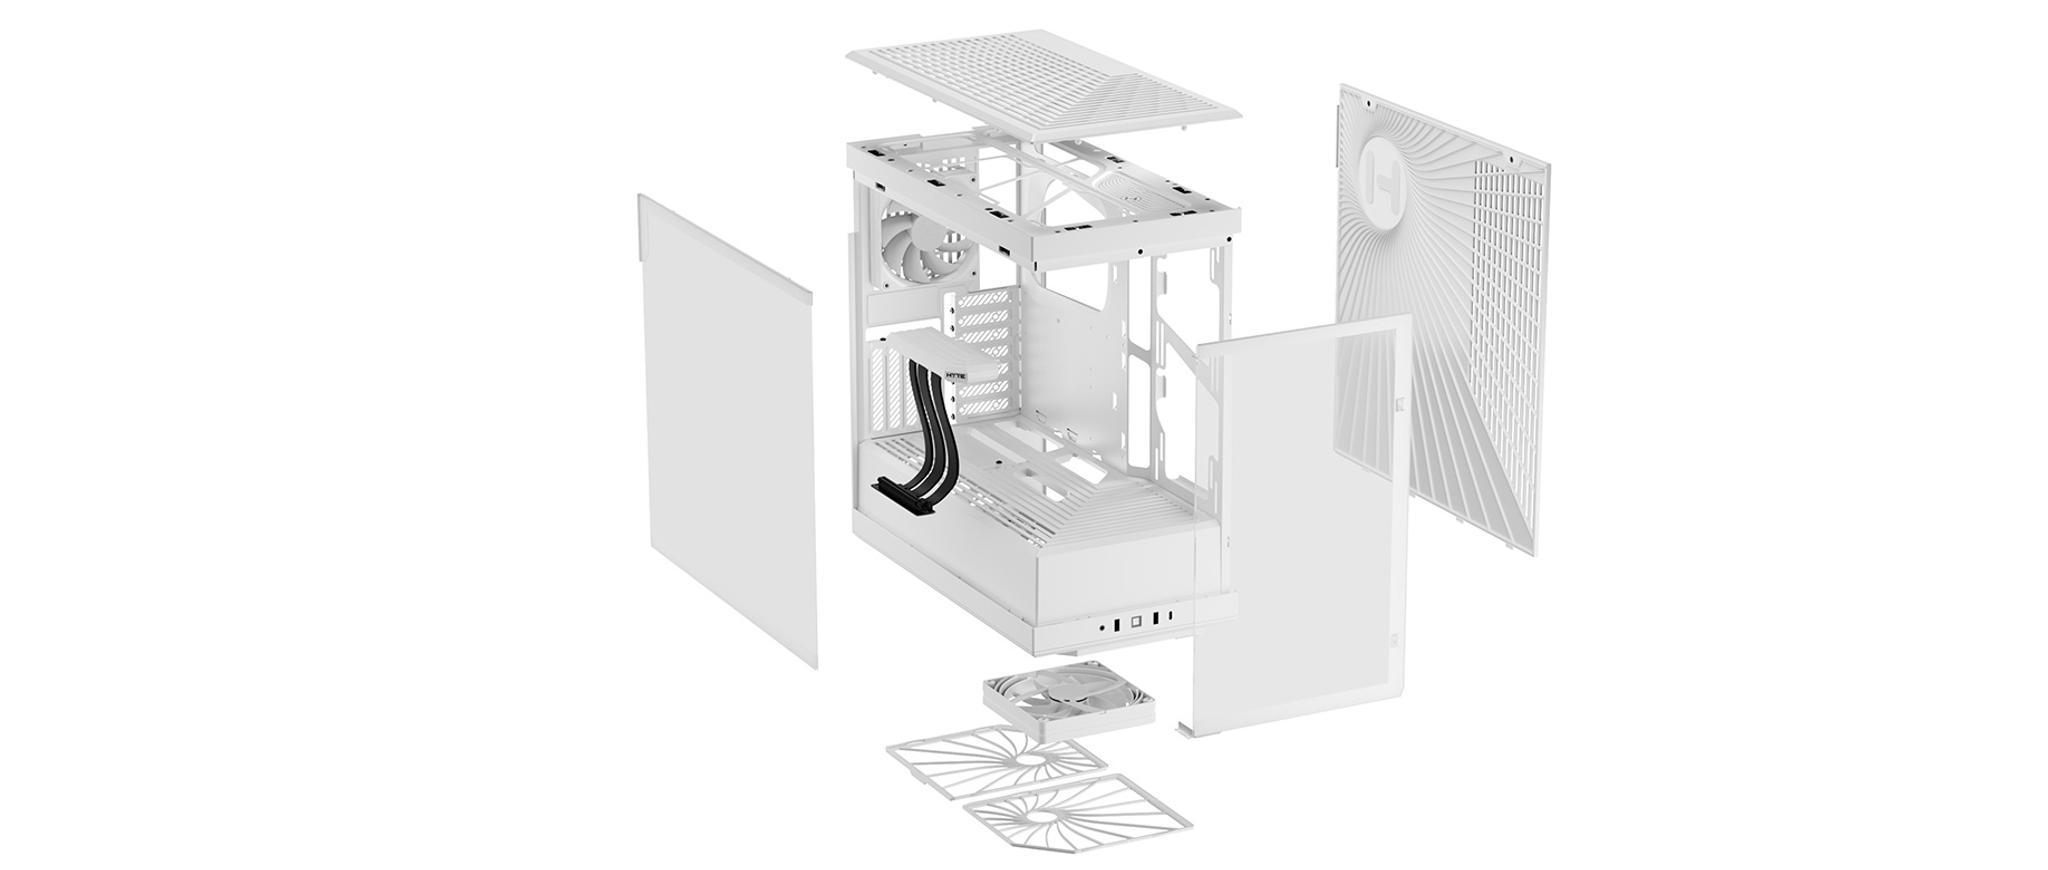 Y40 - ATX PC Cases with PCIe 4.0 Riser, HYTE White